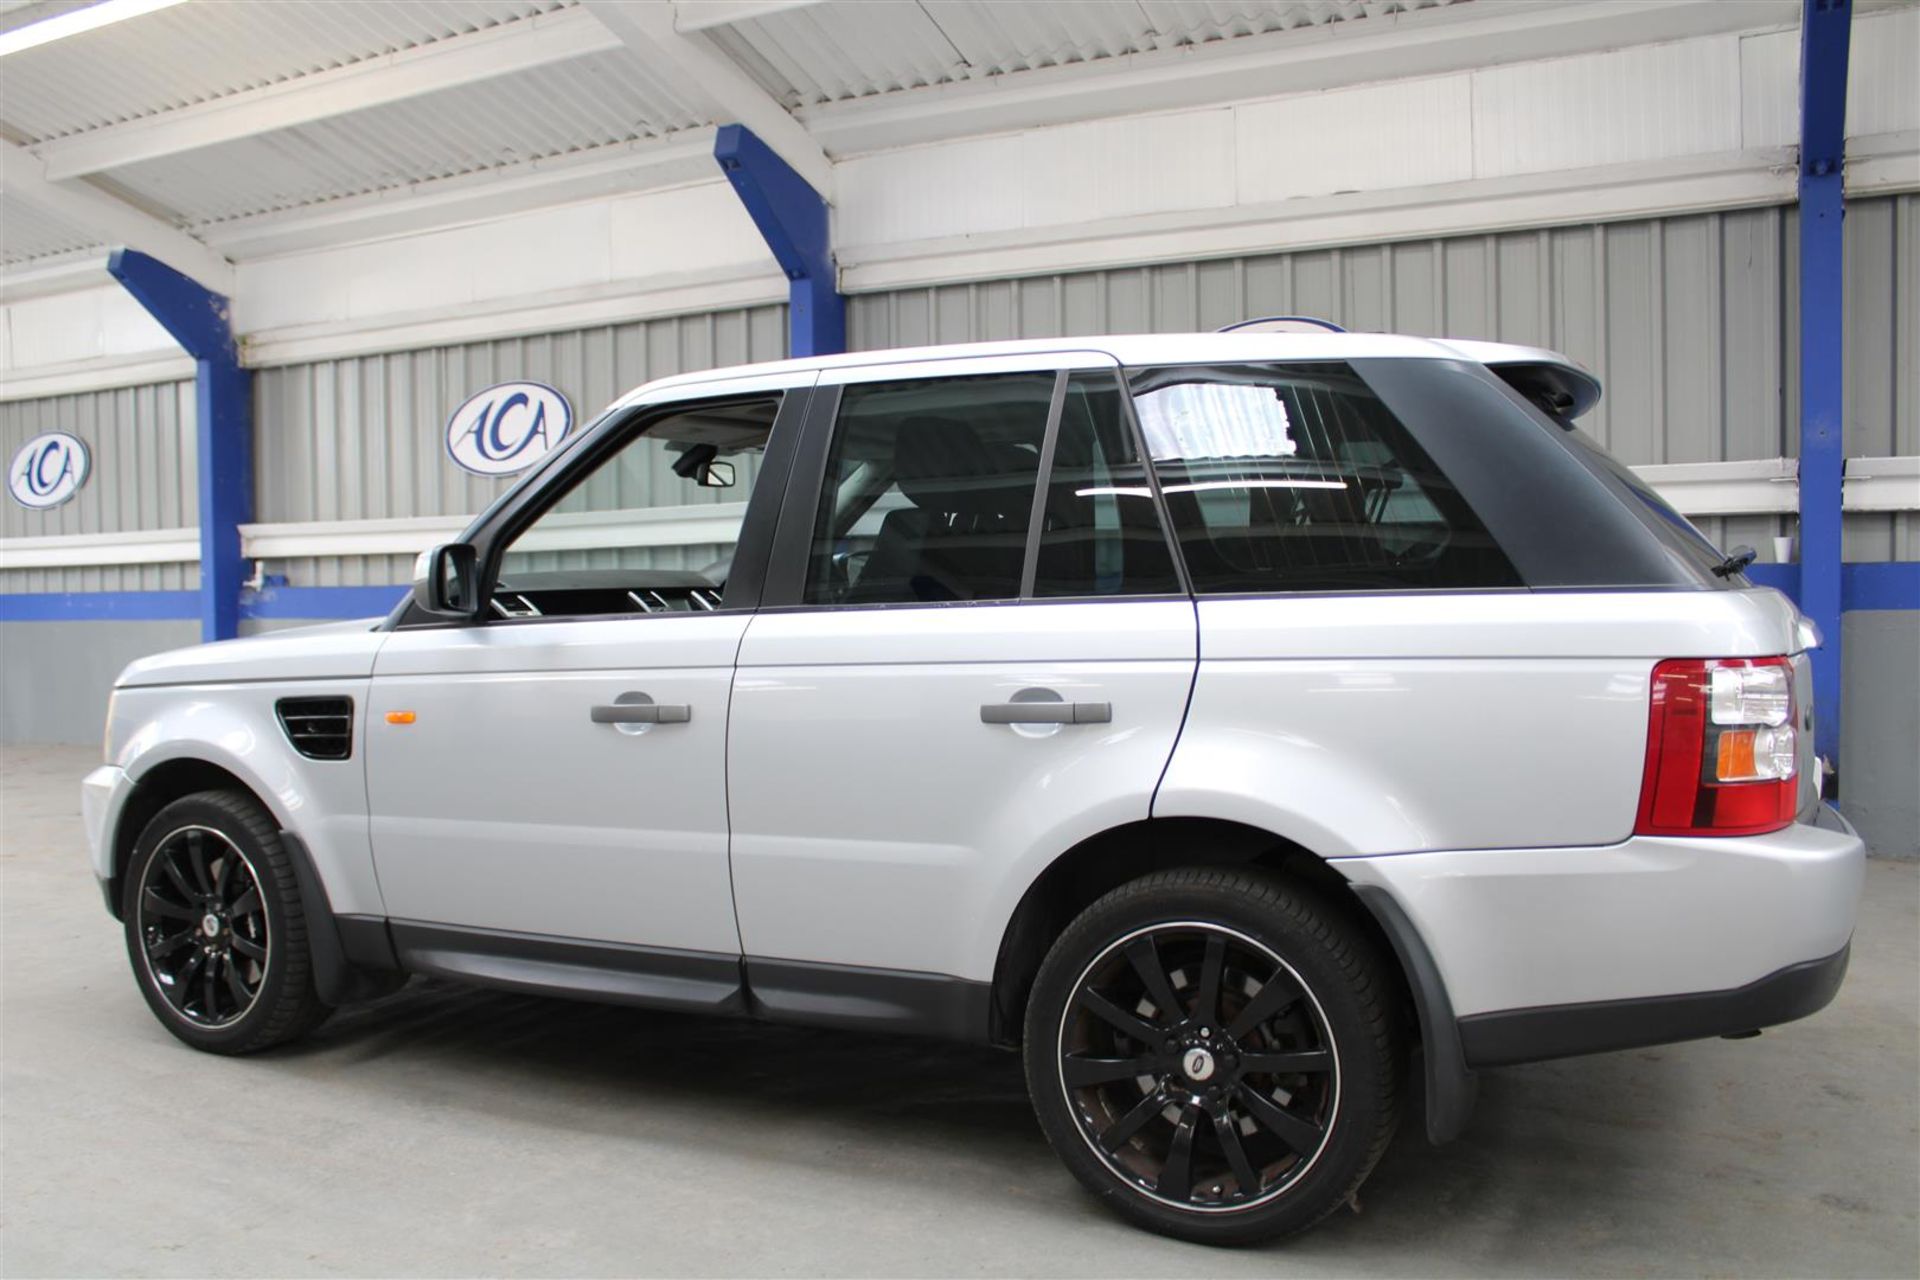 2007 Land Rover R/R SP HSE TDV6 - Image 2 of 31